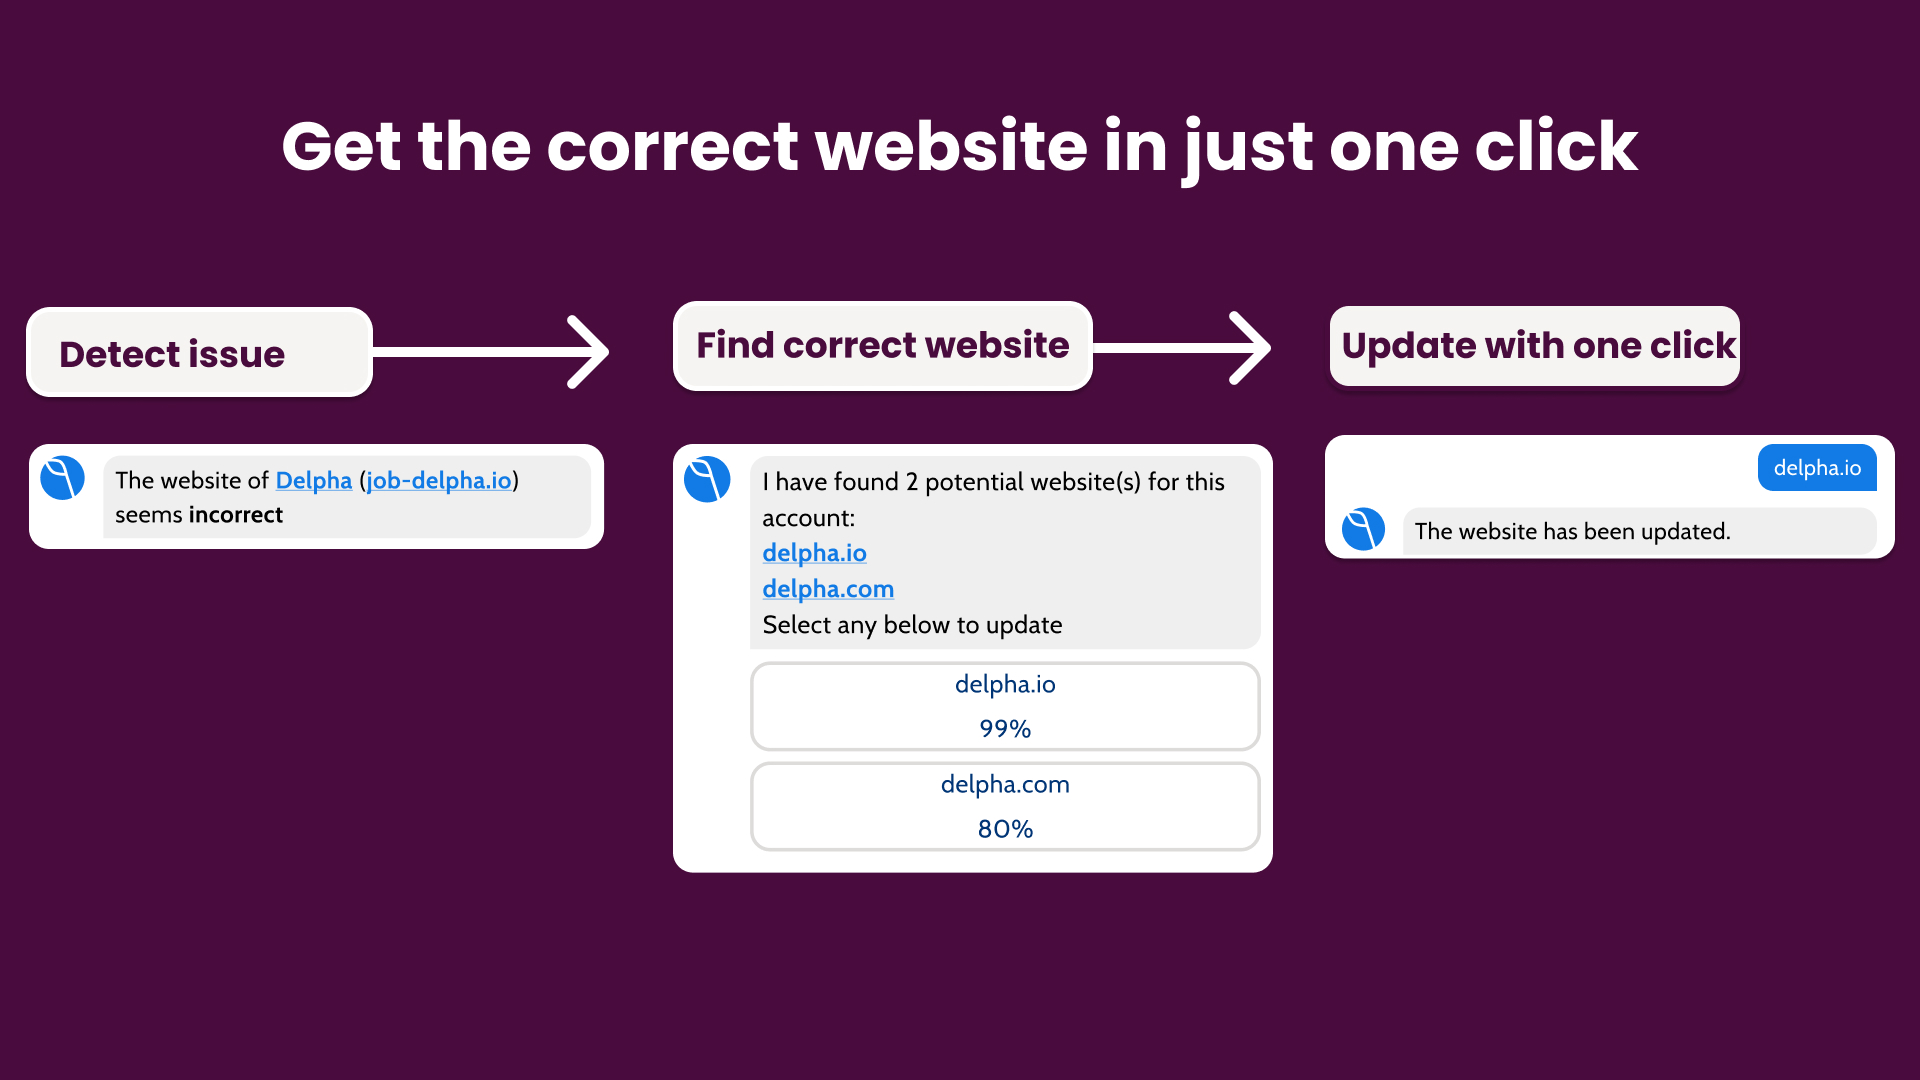 Suggest Correct Websites works in three quick steps starting with detection of the problem, suggesting valid emails discovered online and allowing the end user to update the account with one click.